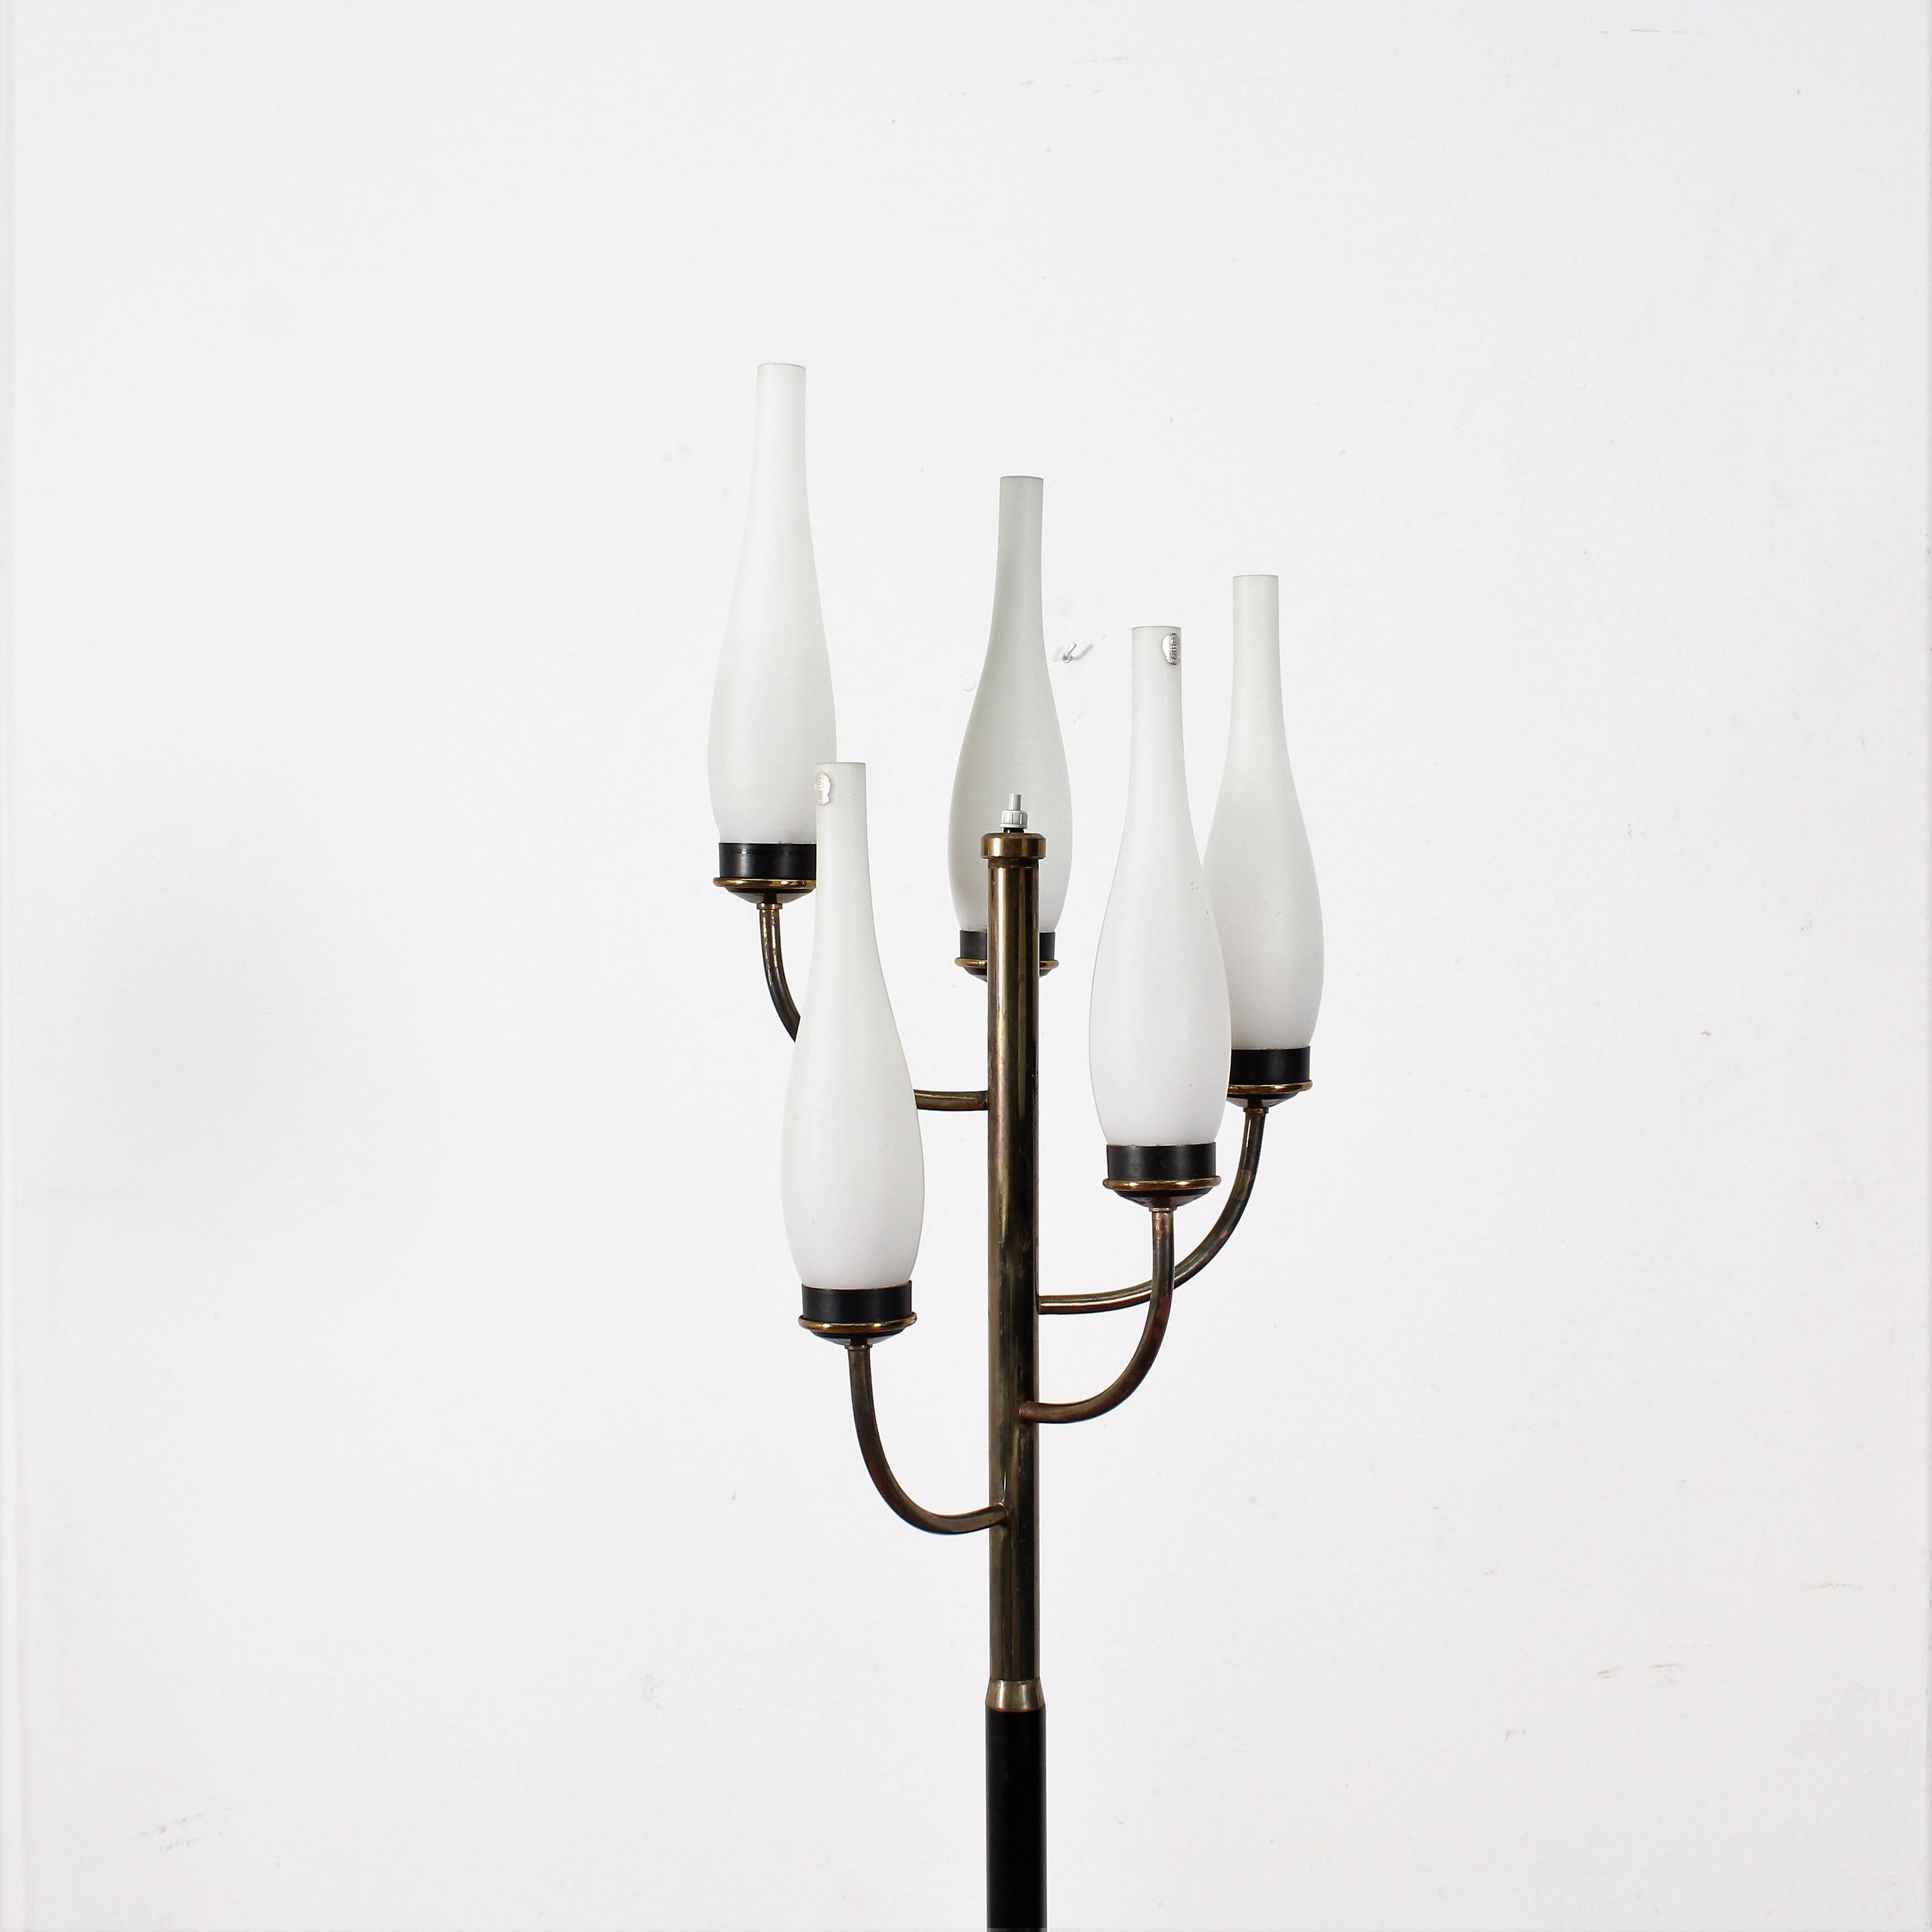 Nice vintage floor lamp Stilnovo style, manufactured in Italy in 1960s. The lamp is made of metal and white opaline glass.
Wear consistent with age and use.